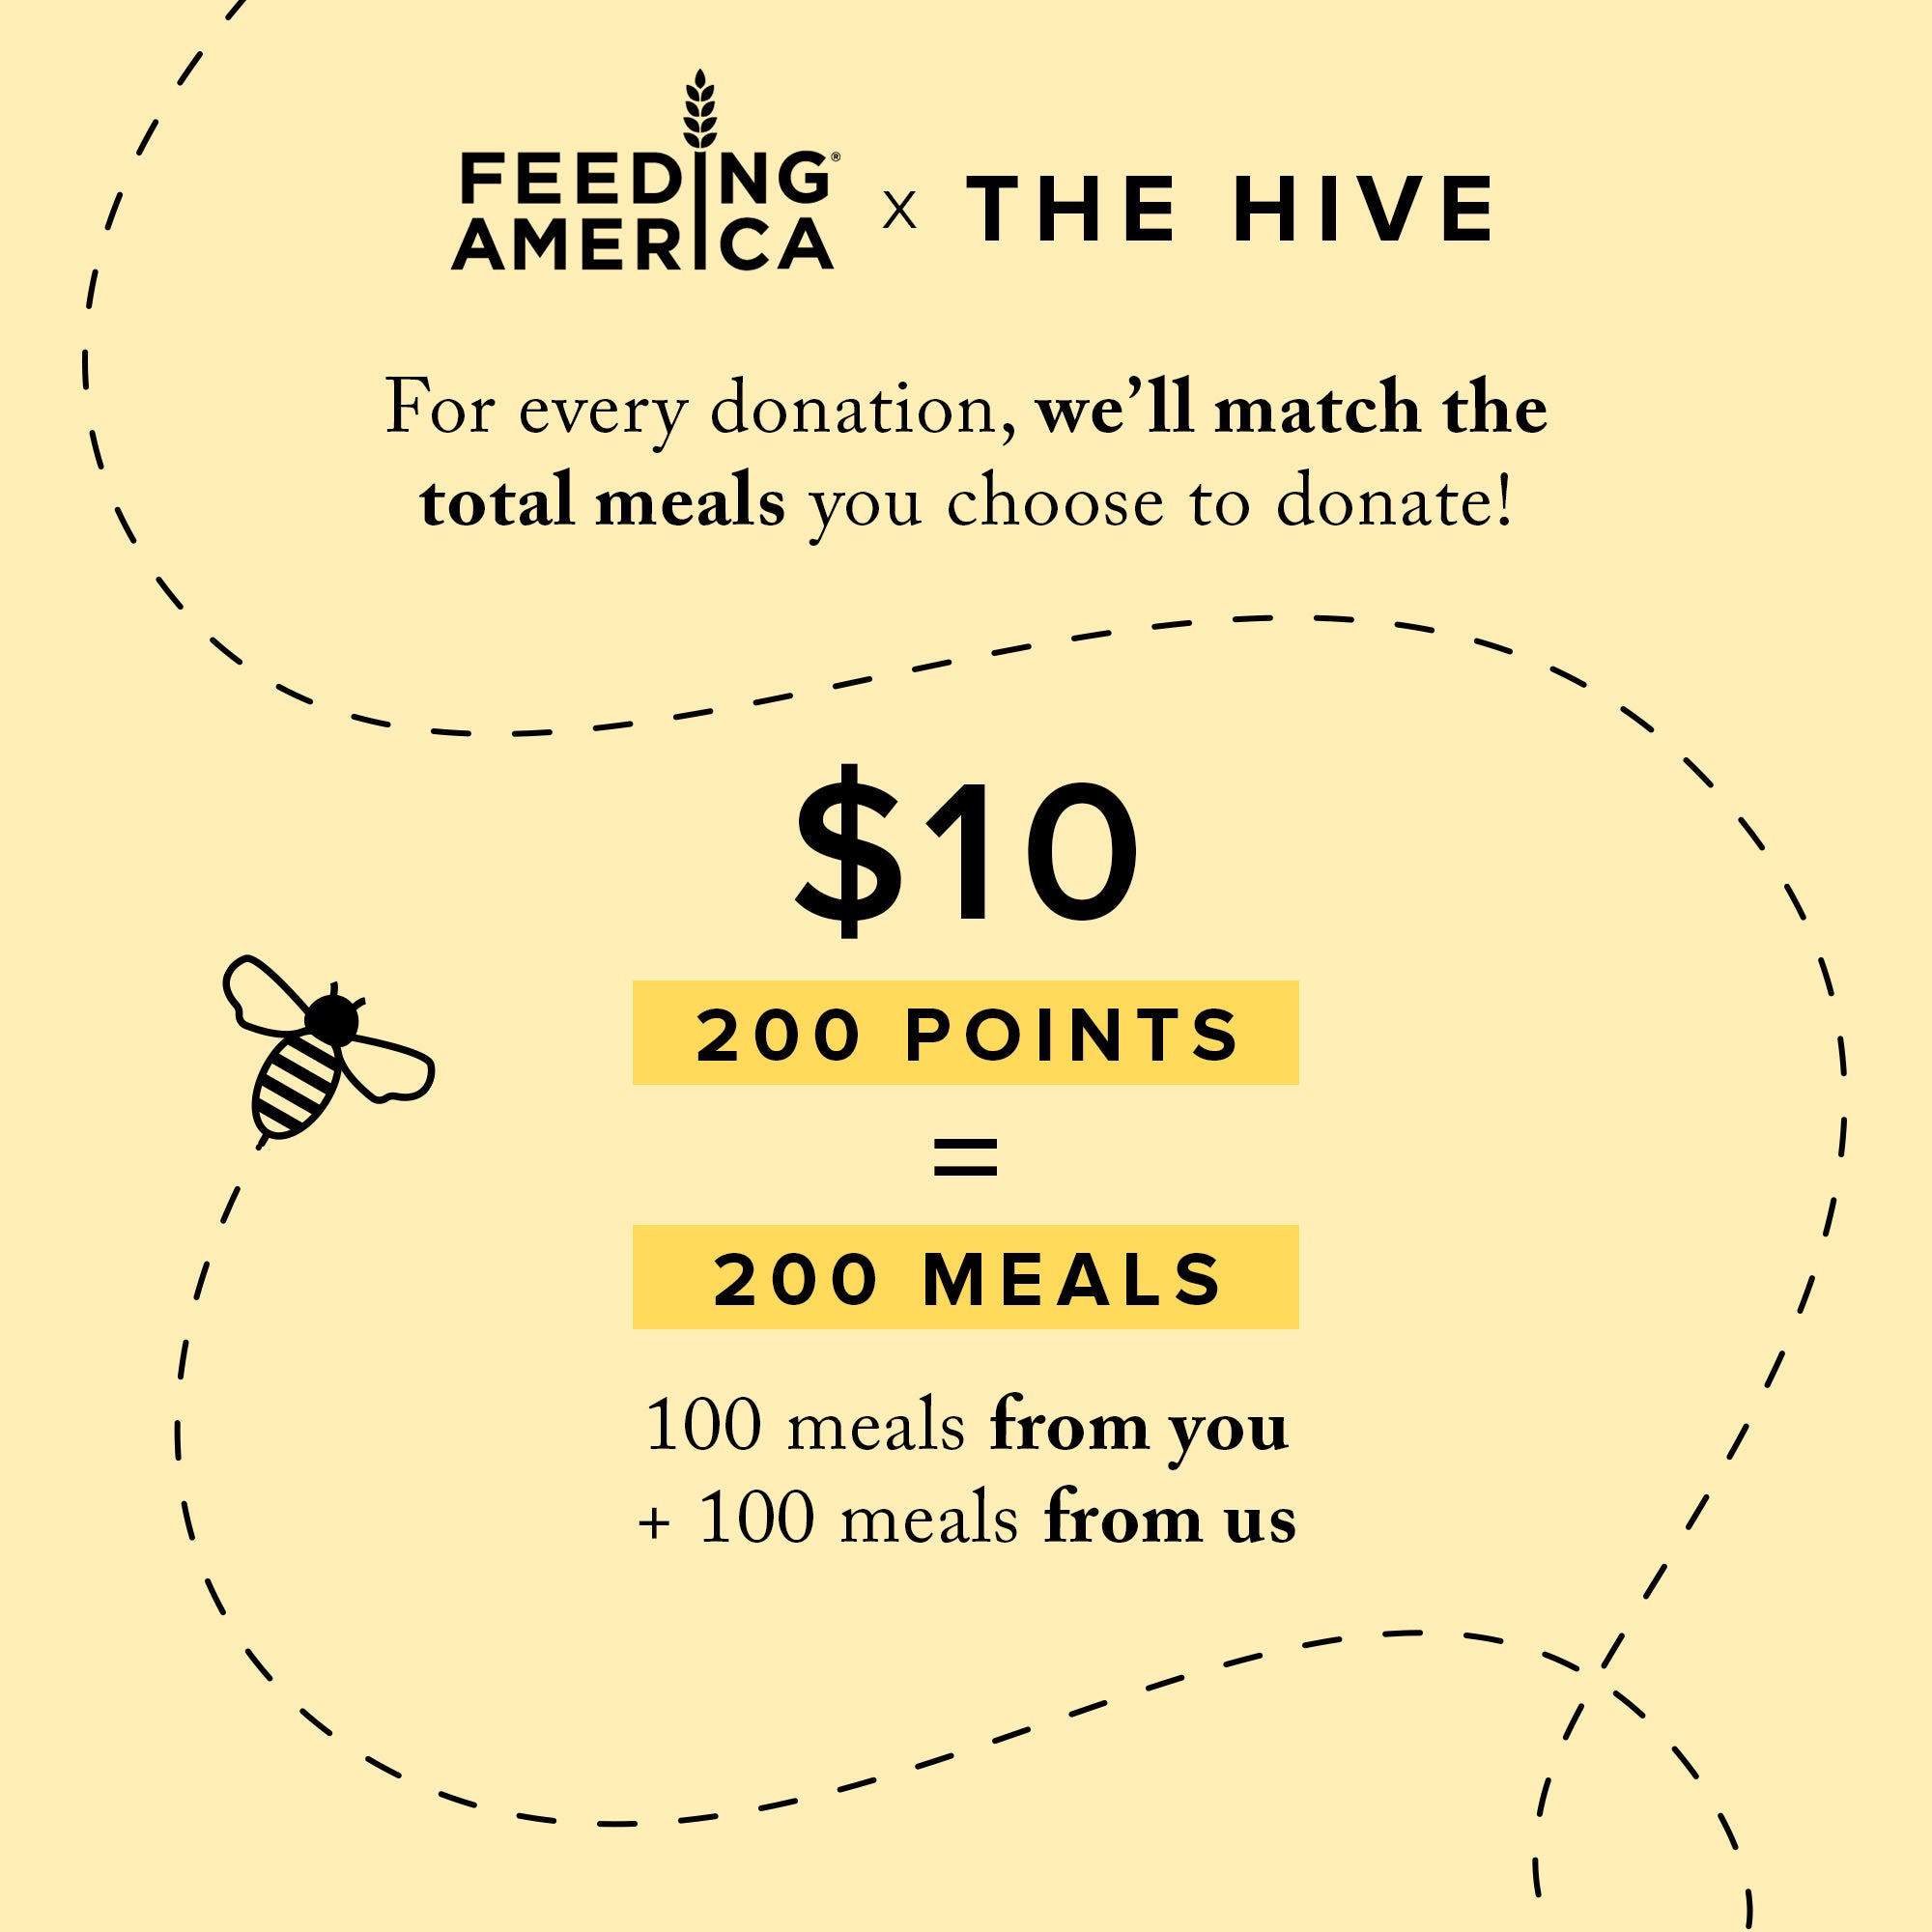 The Hive x Feeding America 200 Meals Donation